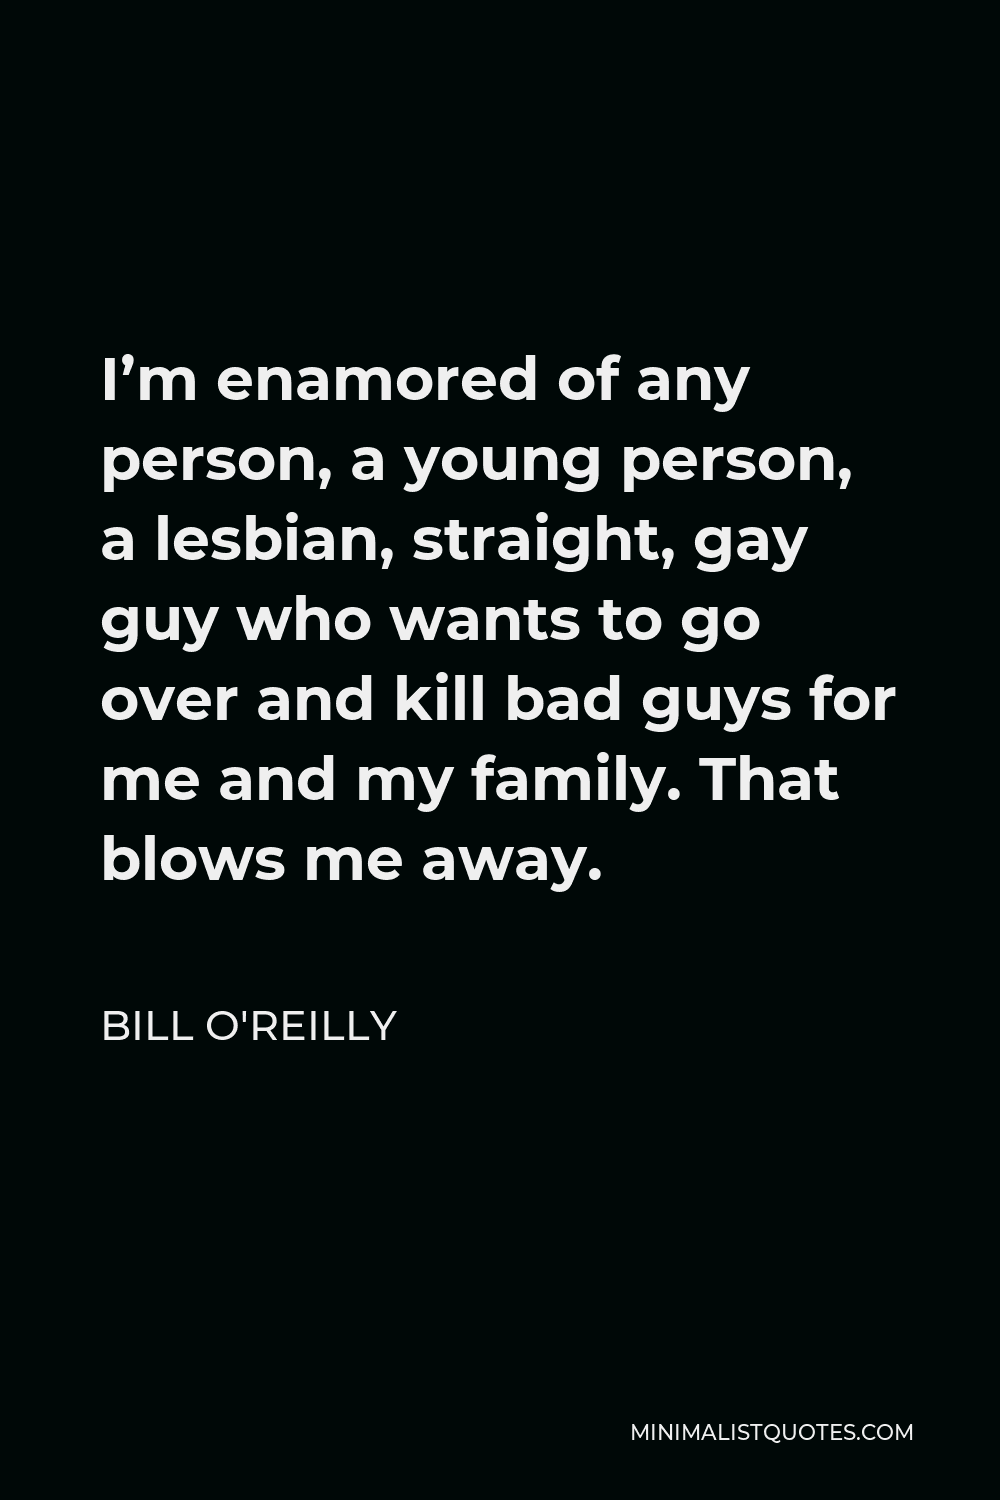 Bill O'Reilly Quote - I’m enamored of any person, a young person, a lesbian, straight, gay guy who wants to go over and kill bad guys for me and my family. That blows me away.